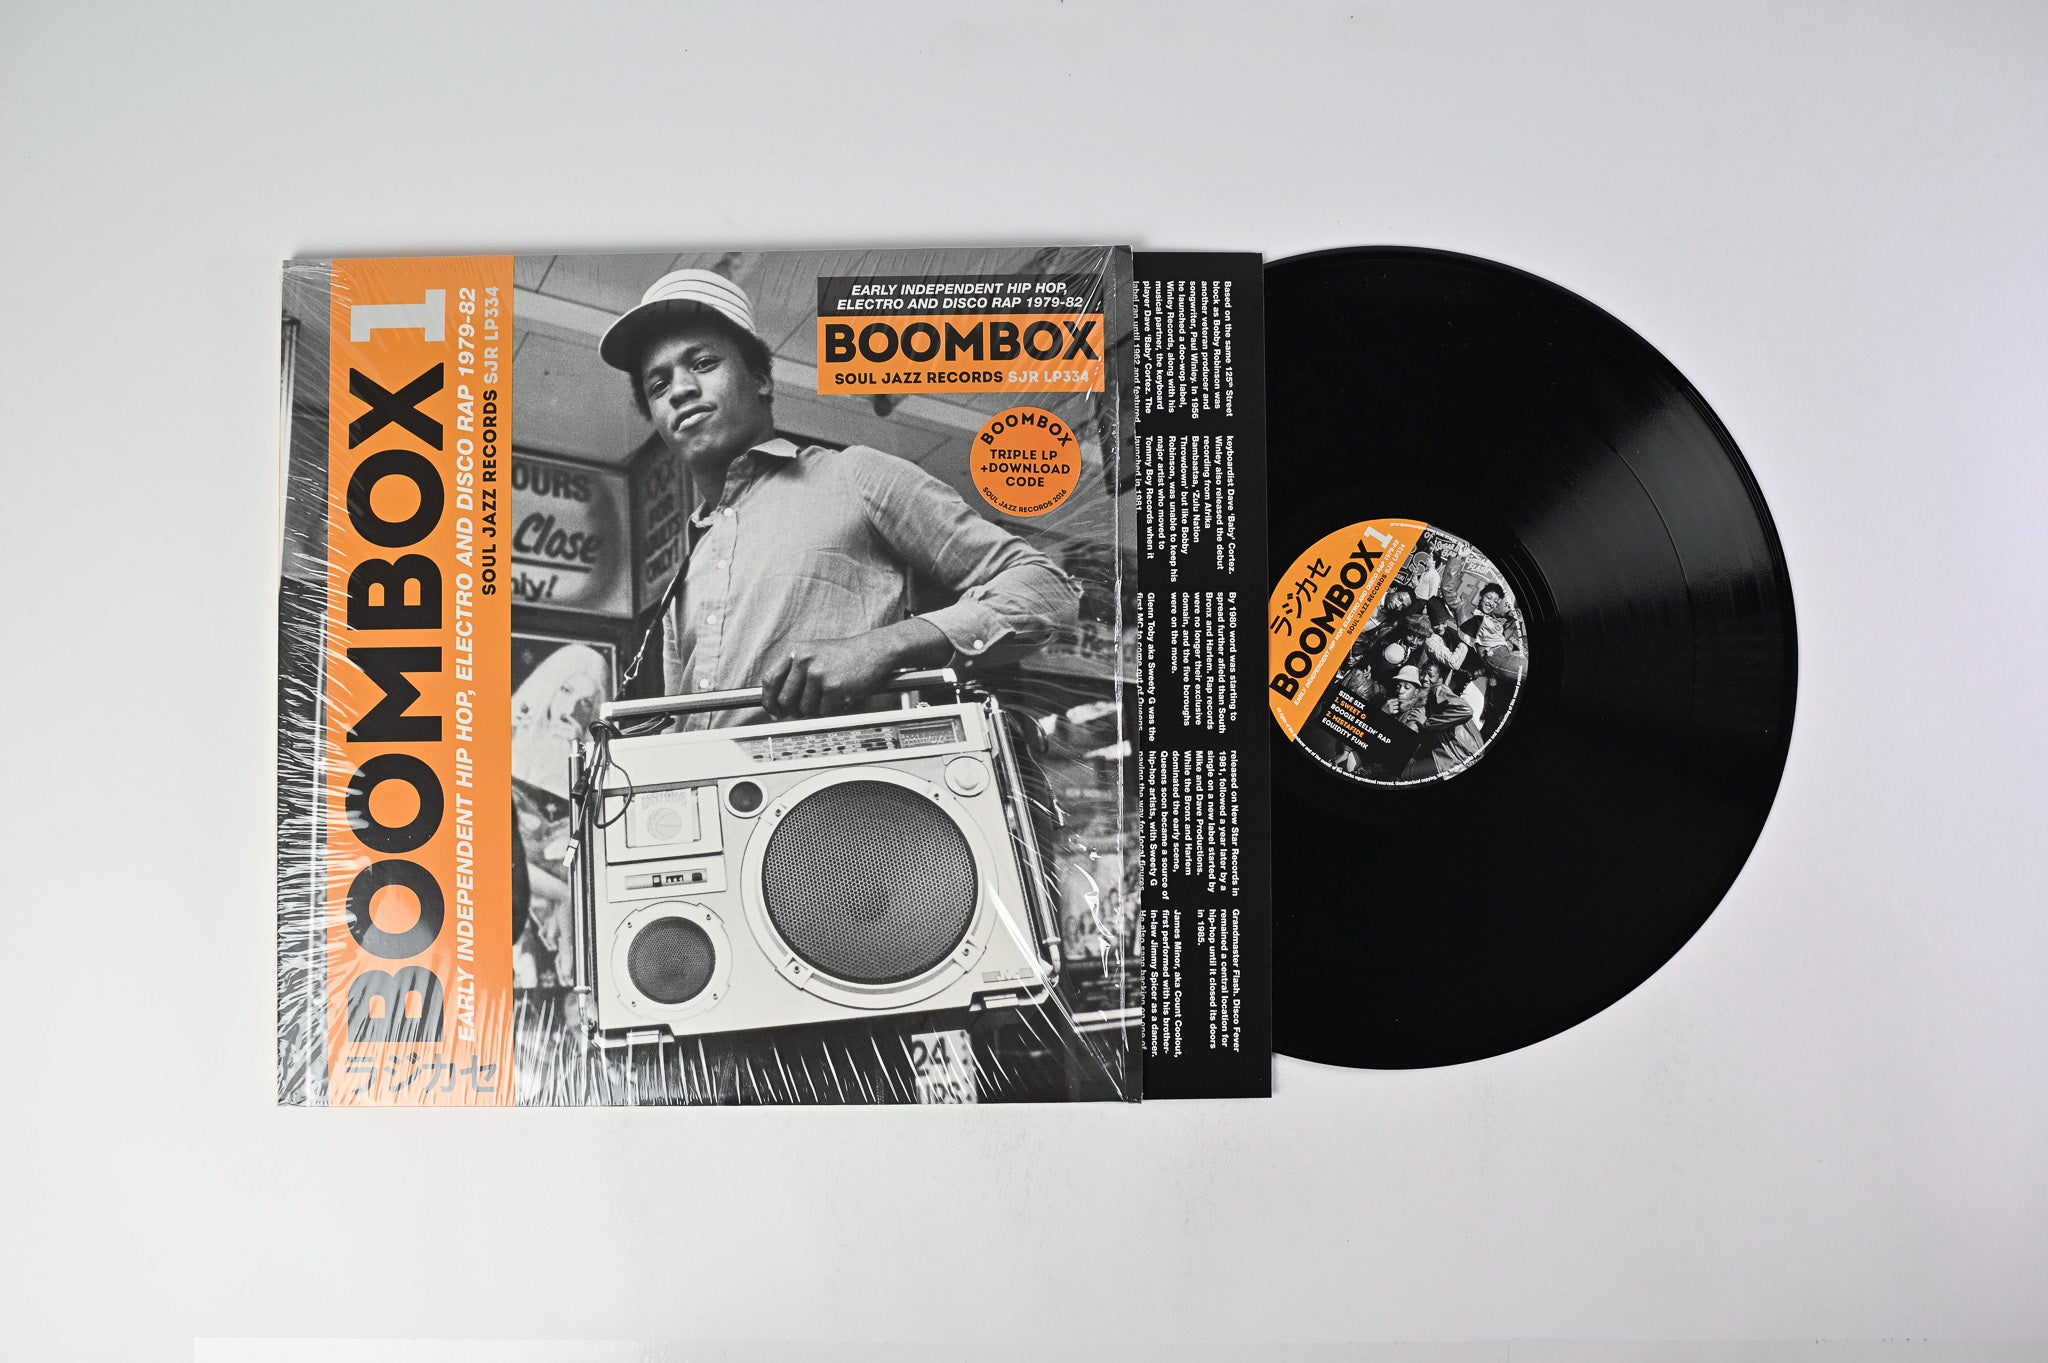 Various - Boombox 1 (Early Independent Hip Hop, Electro And Disco Rap 1979-82) on Soul Jazz Records - 3-lp